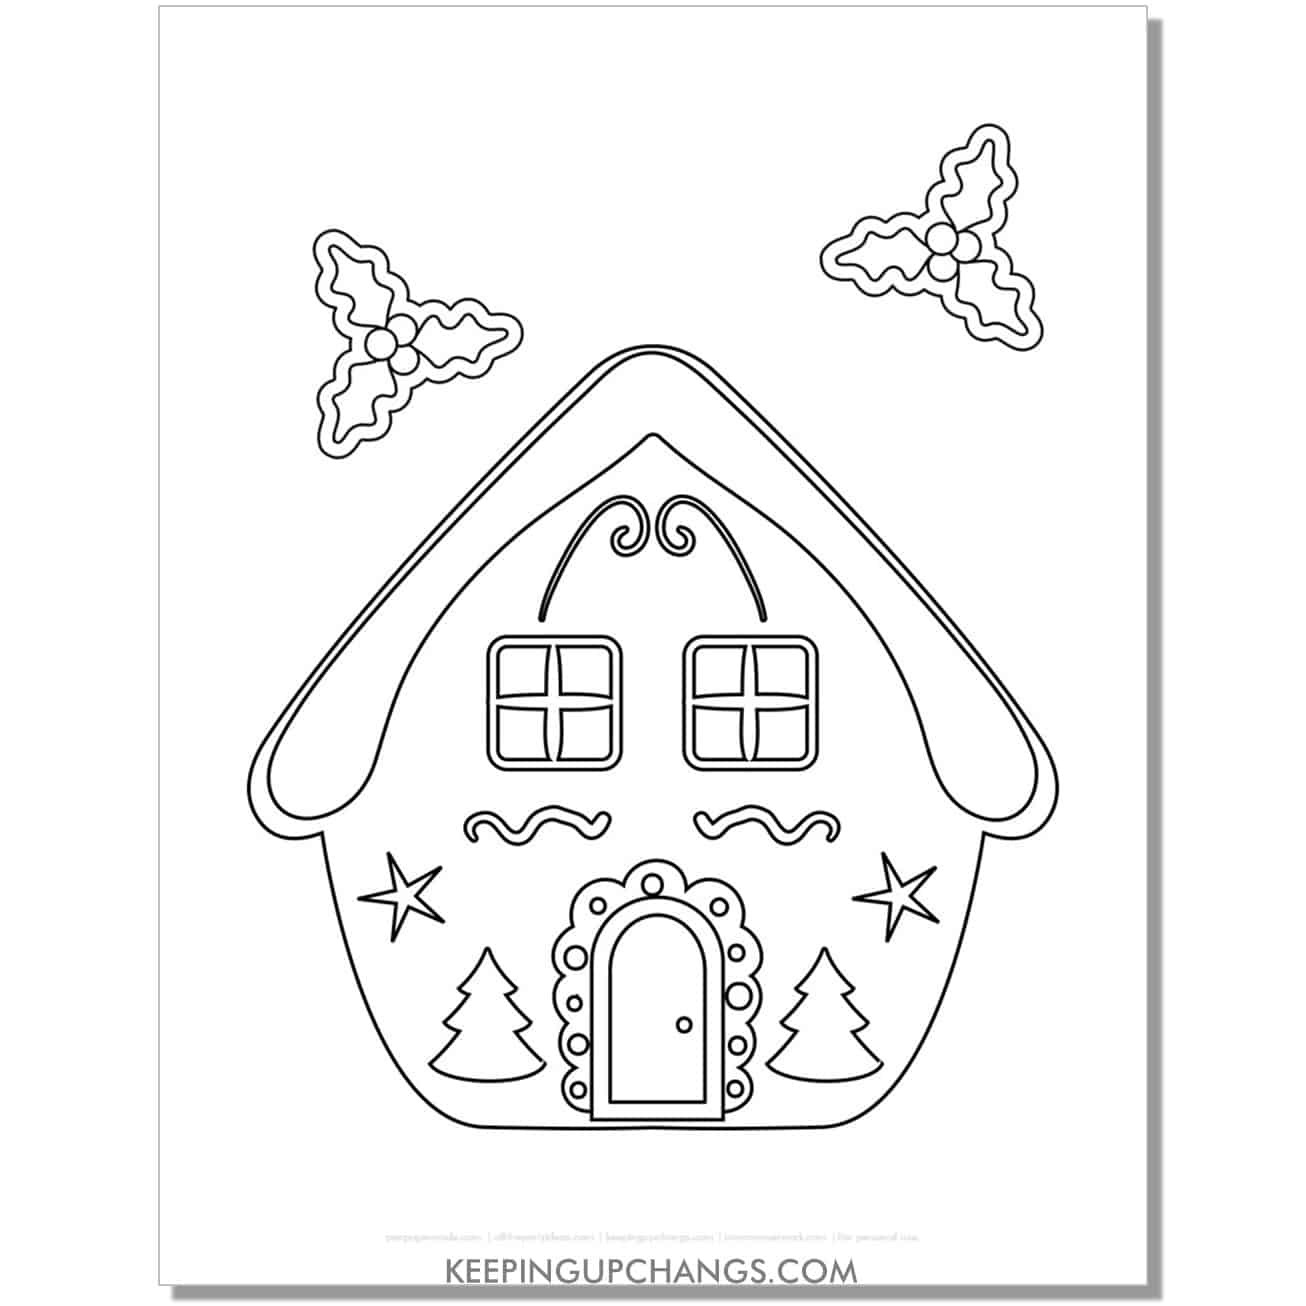 free gingerbread house with trees, stars, holly coloring page.